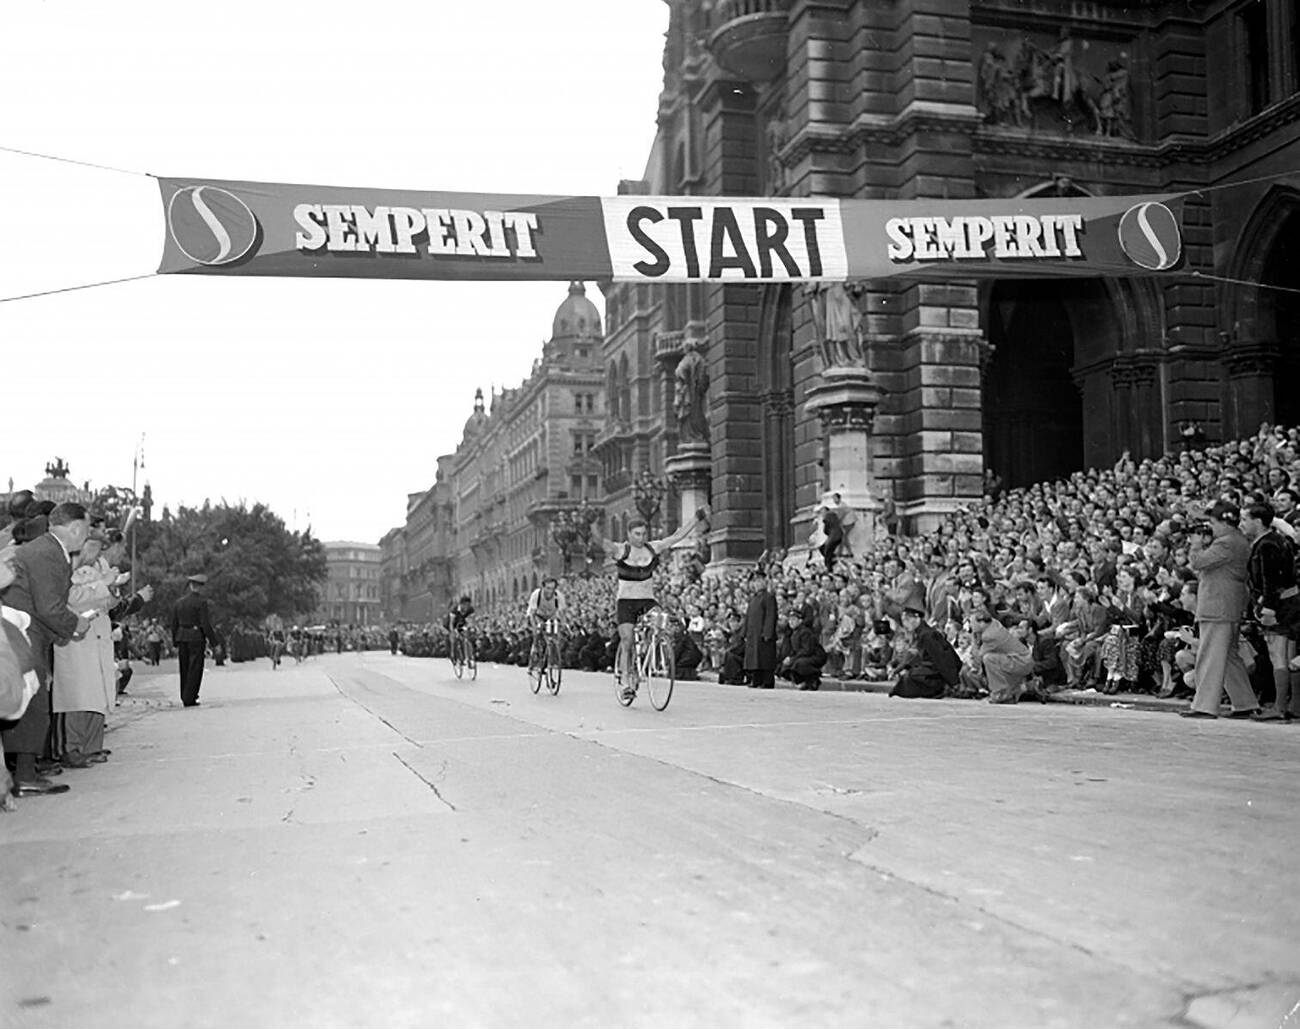 The winner of the Tour of Austria 1950, Richard Menapace, at the finish at the Rathausplatz in Vienna, July 1950.